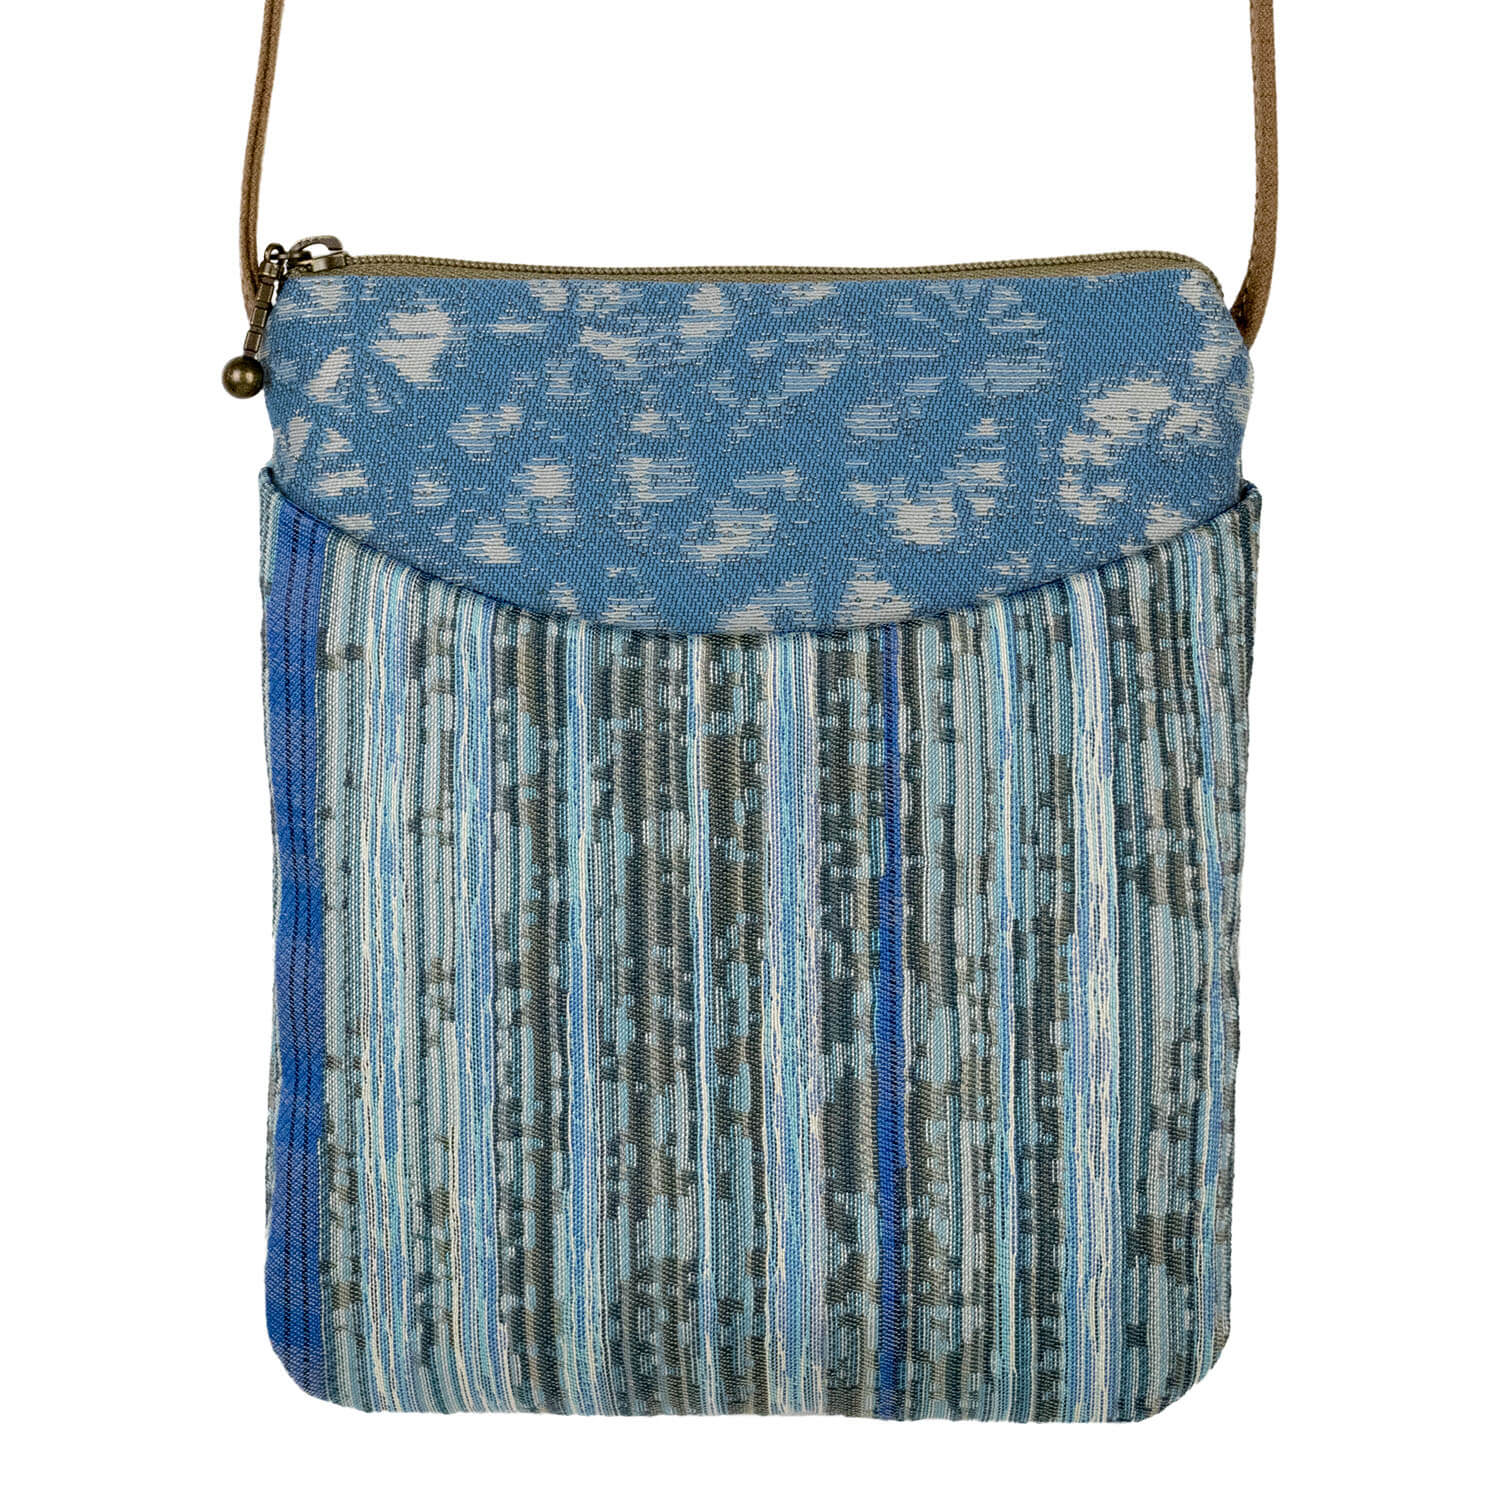 Small crossbody bag with two different blue fabric patterns